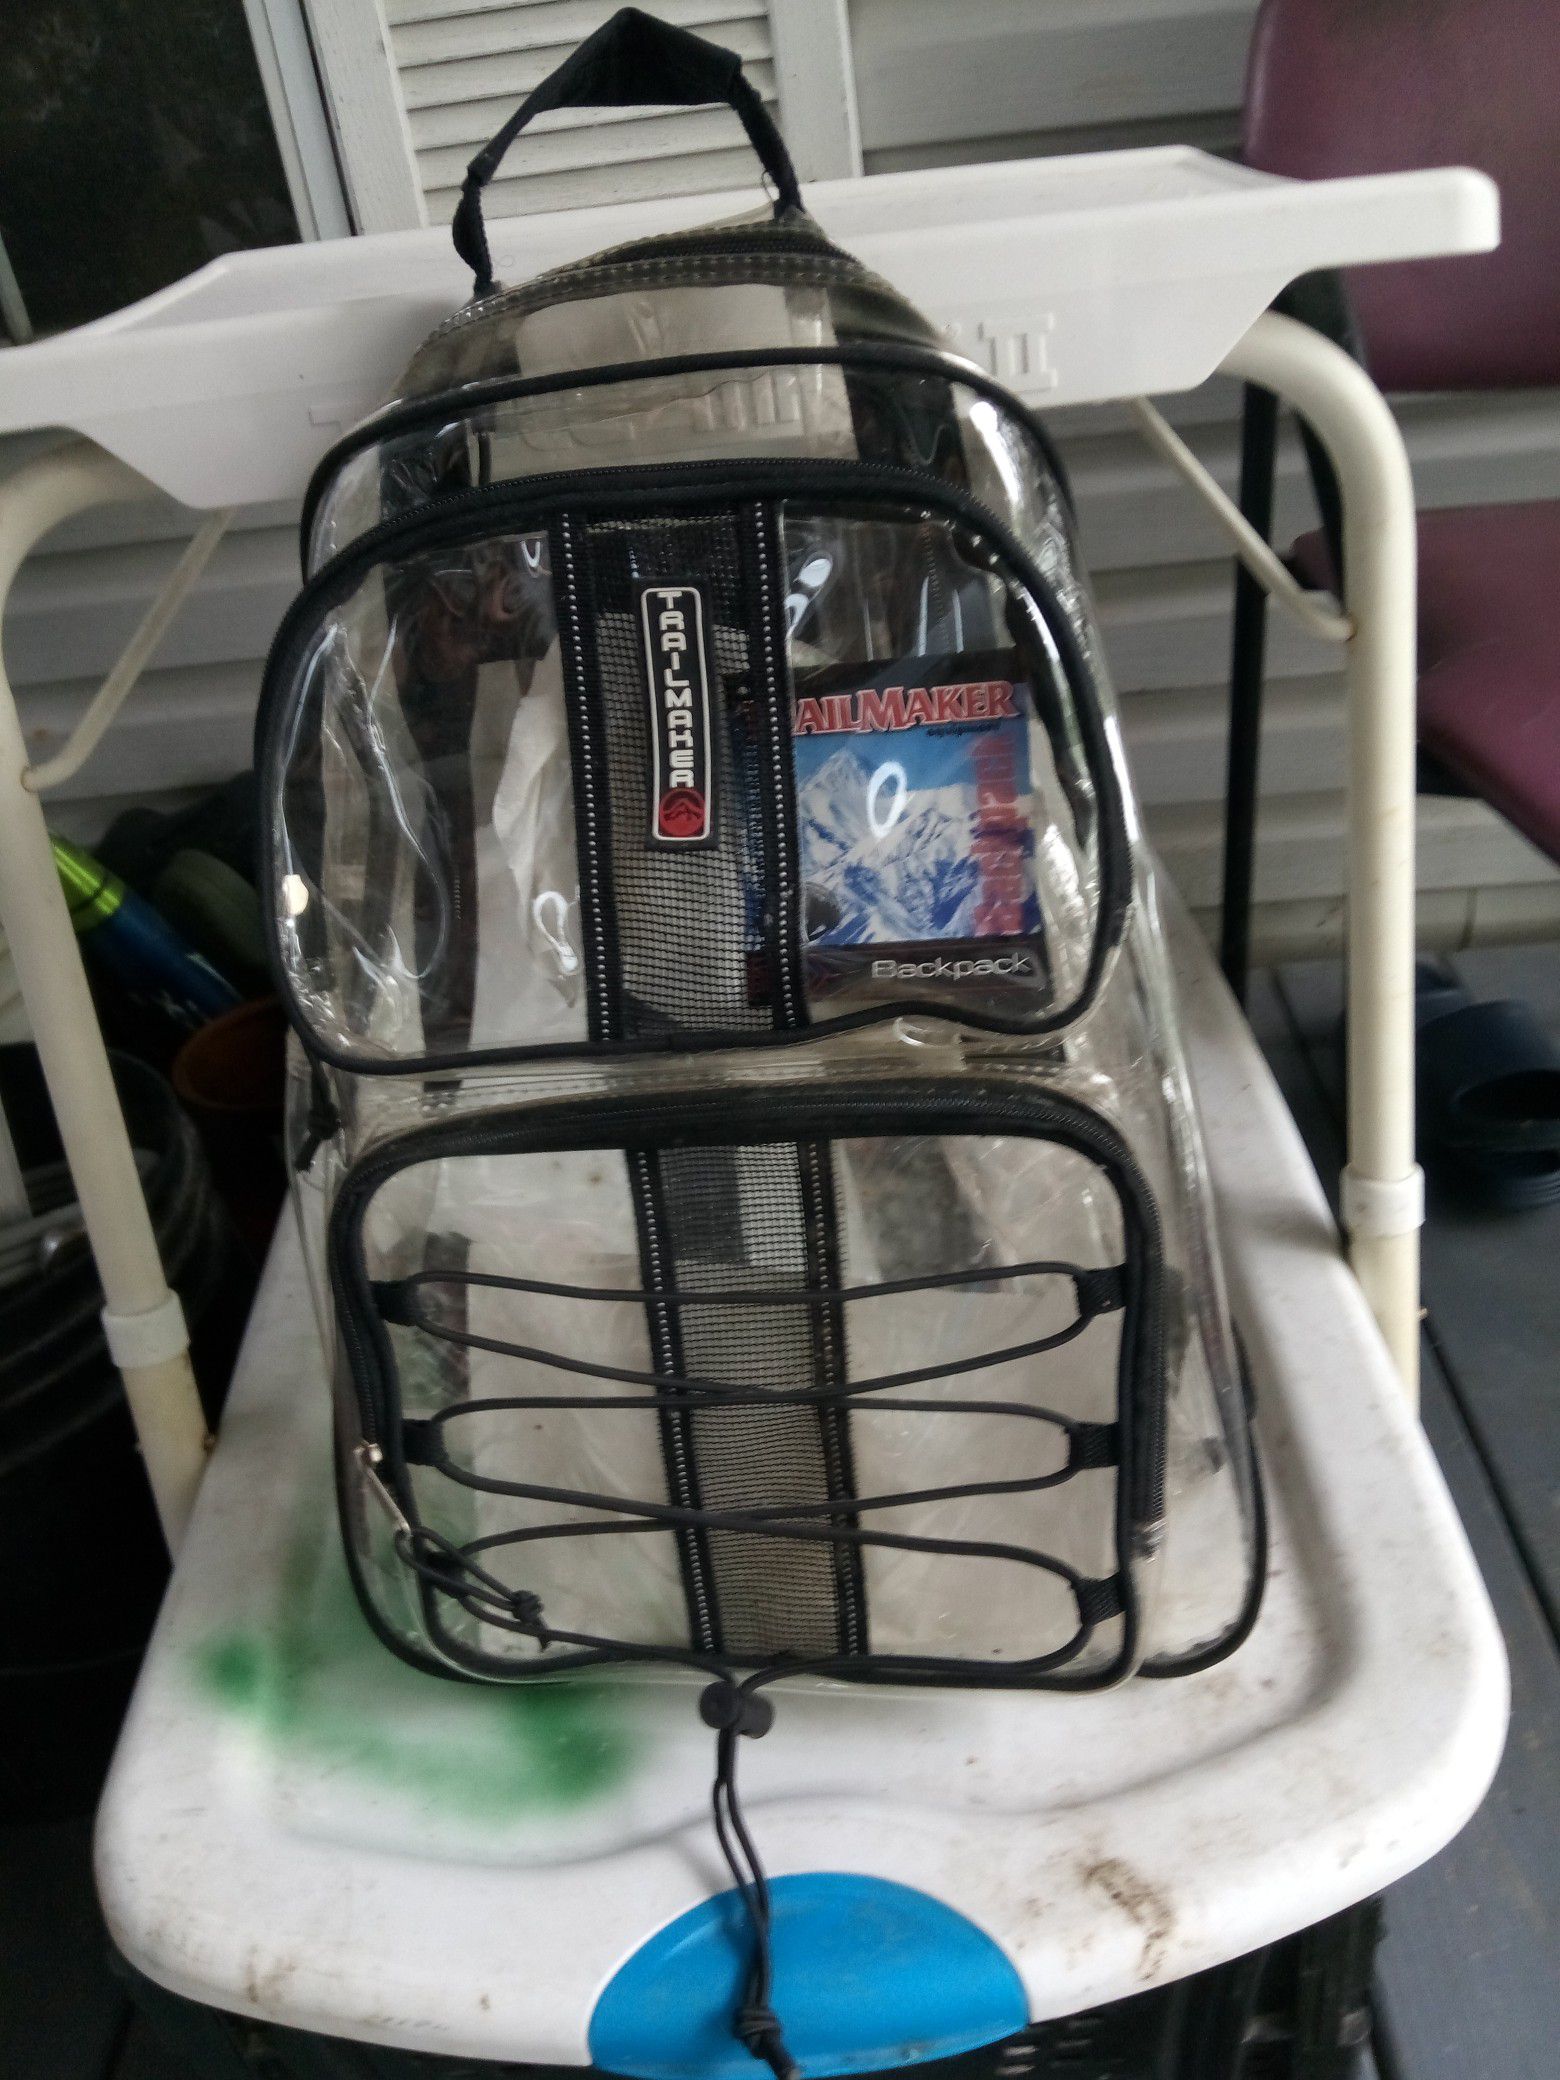 Brand New TRAILMAKER clear Backpack just in time for school